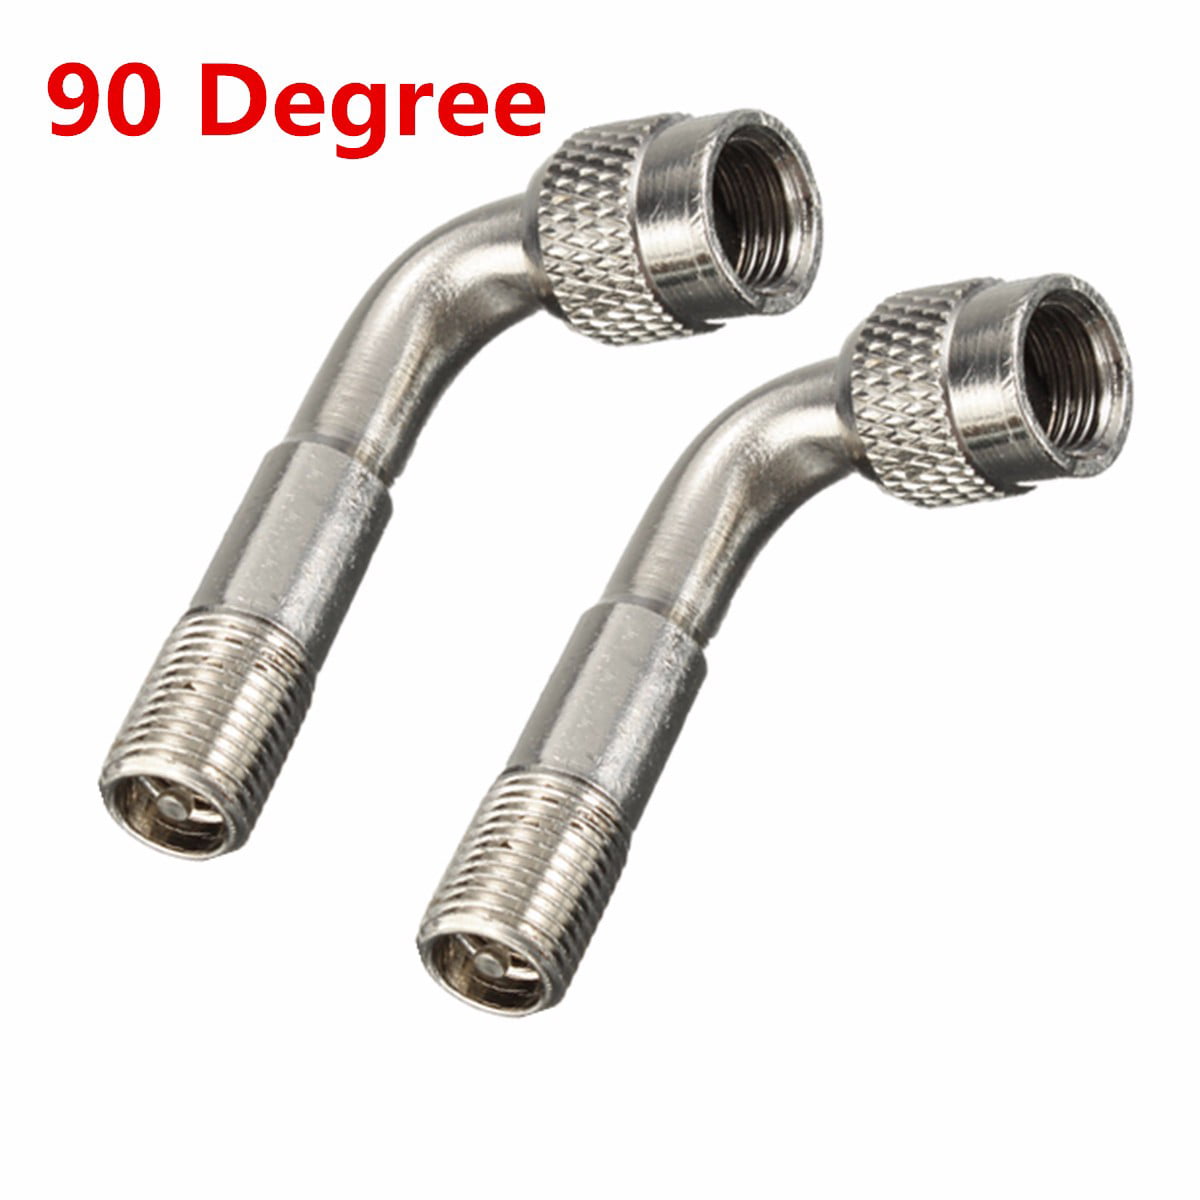 5X 90 Degree Angle Car Motorcycle Bike Tyre Valve Tube Extension Adapter U2N2 